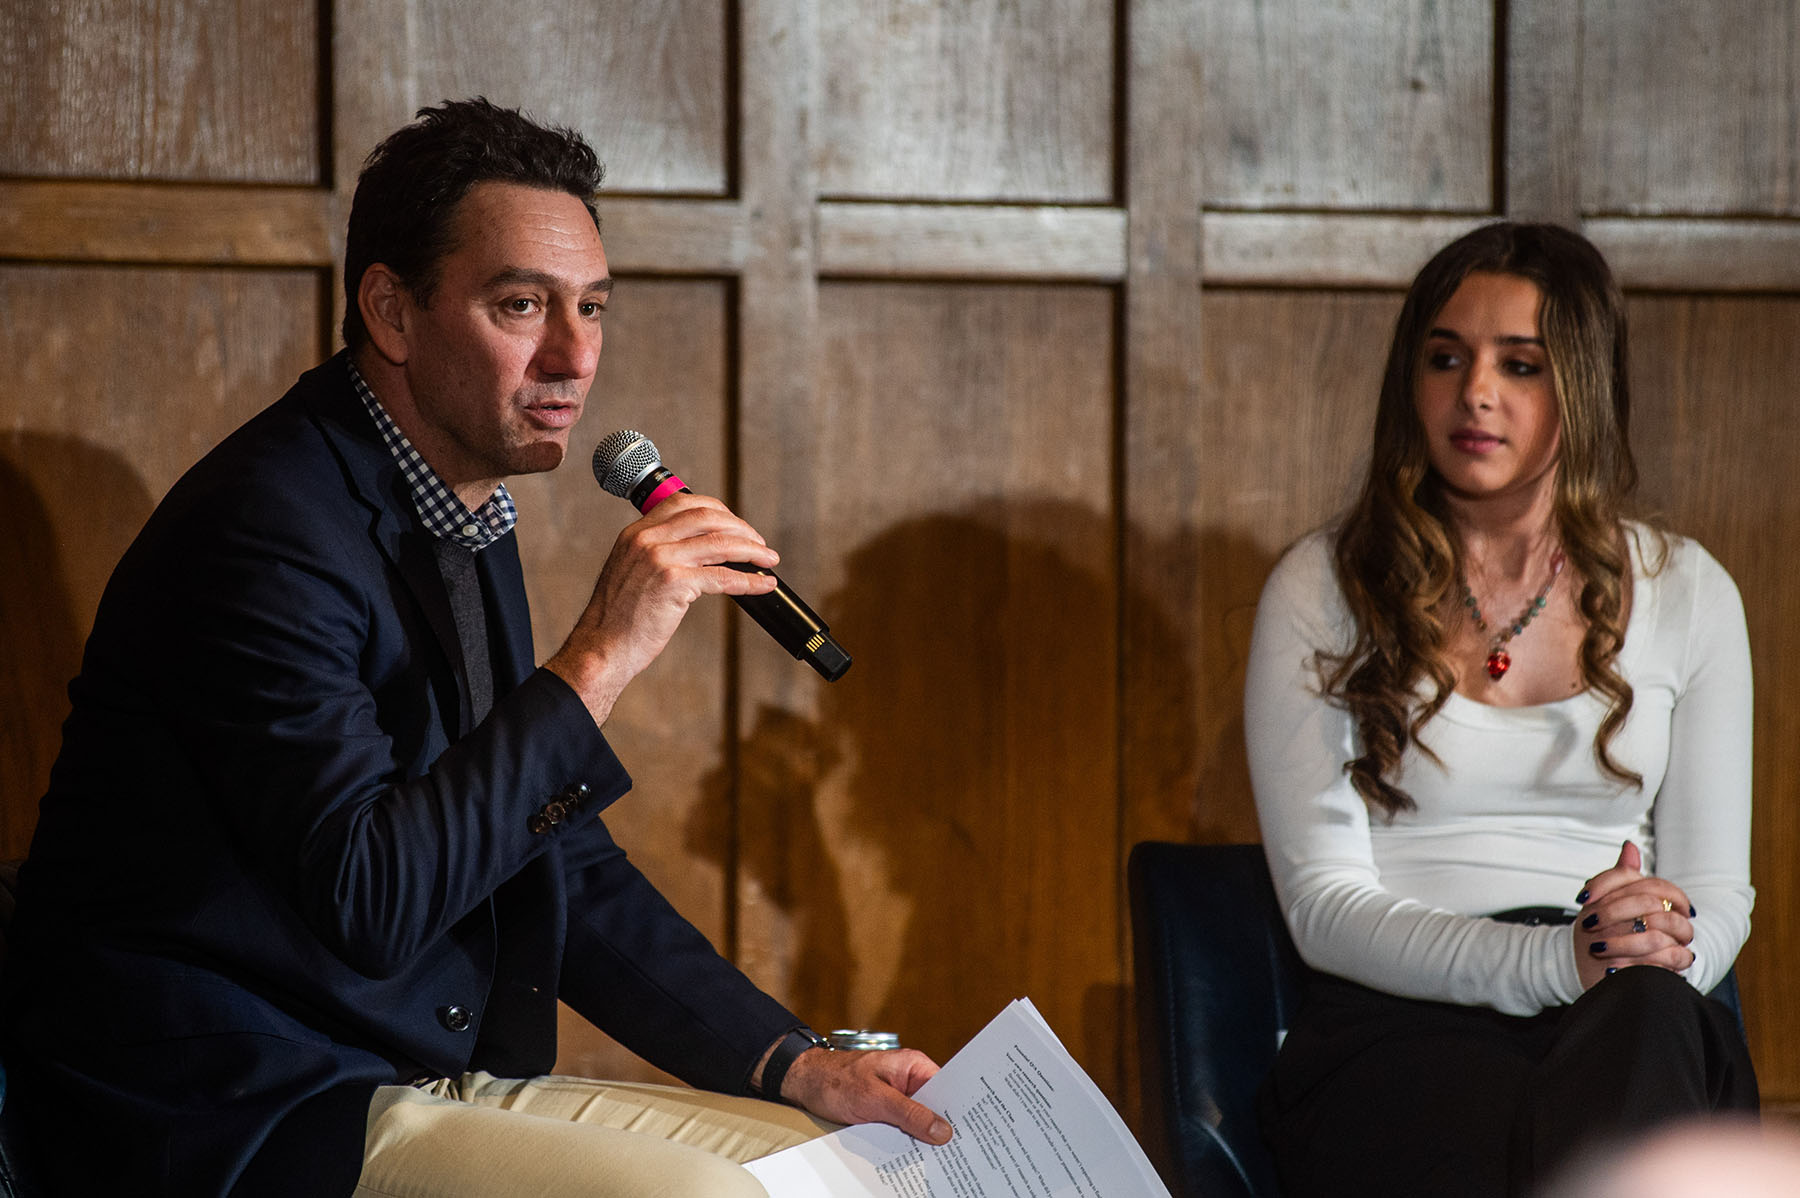 Two people sitting on a stage with a wood panel background. One person is speaking into a microphone while the other looks on.